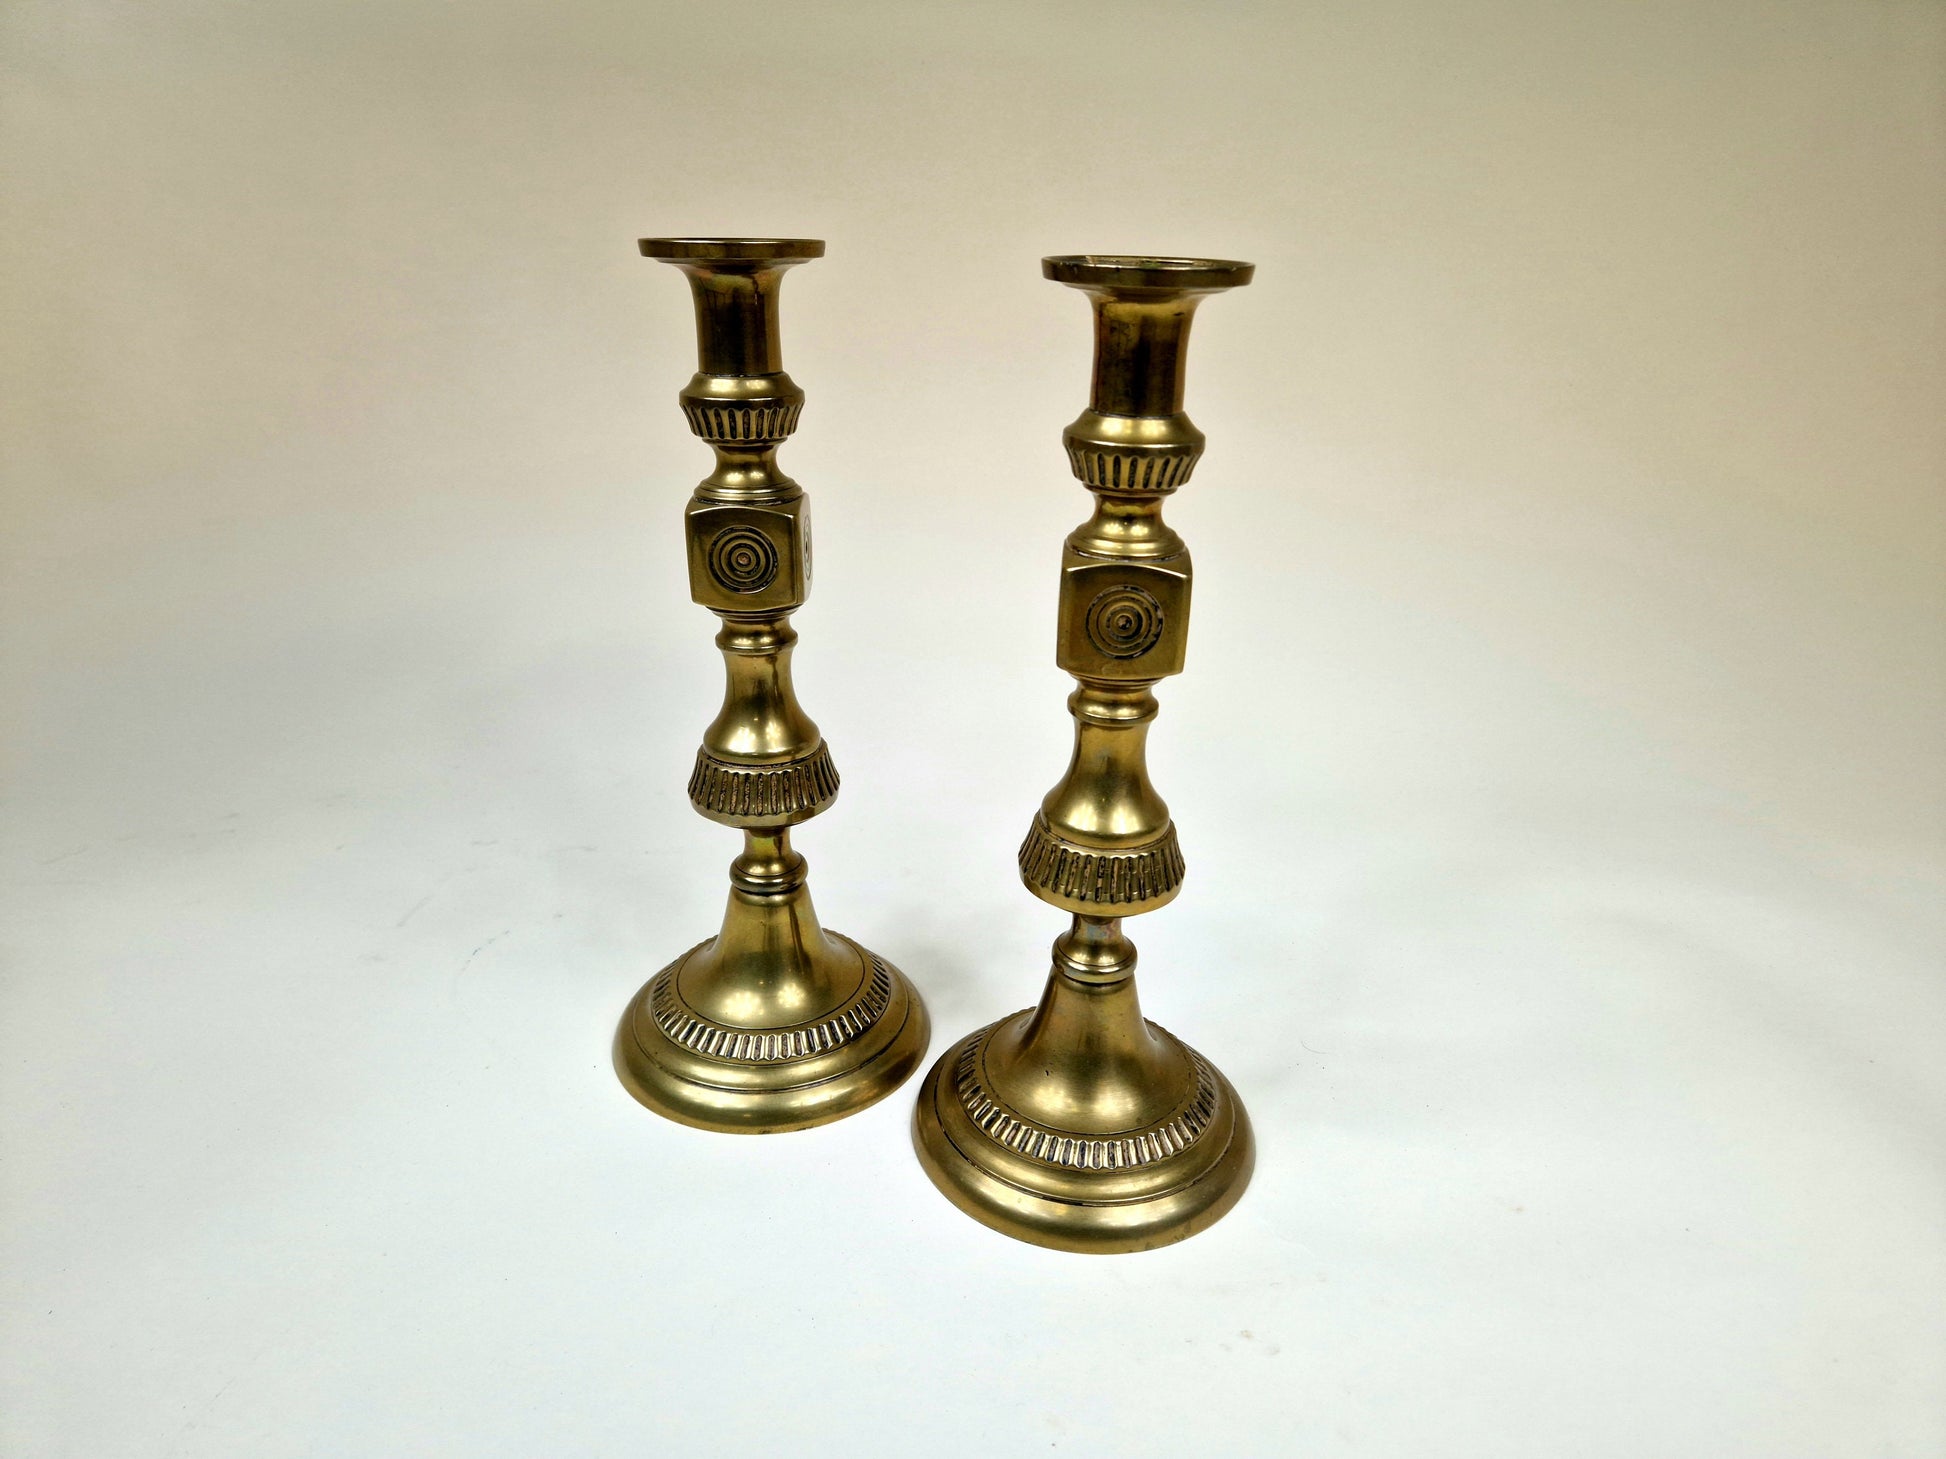 Antique Victorian Brass candle holders with Bullseye Design - Set of 2